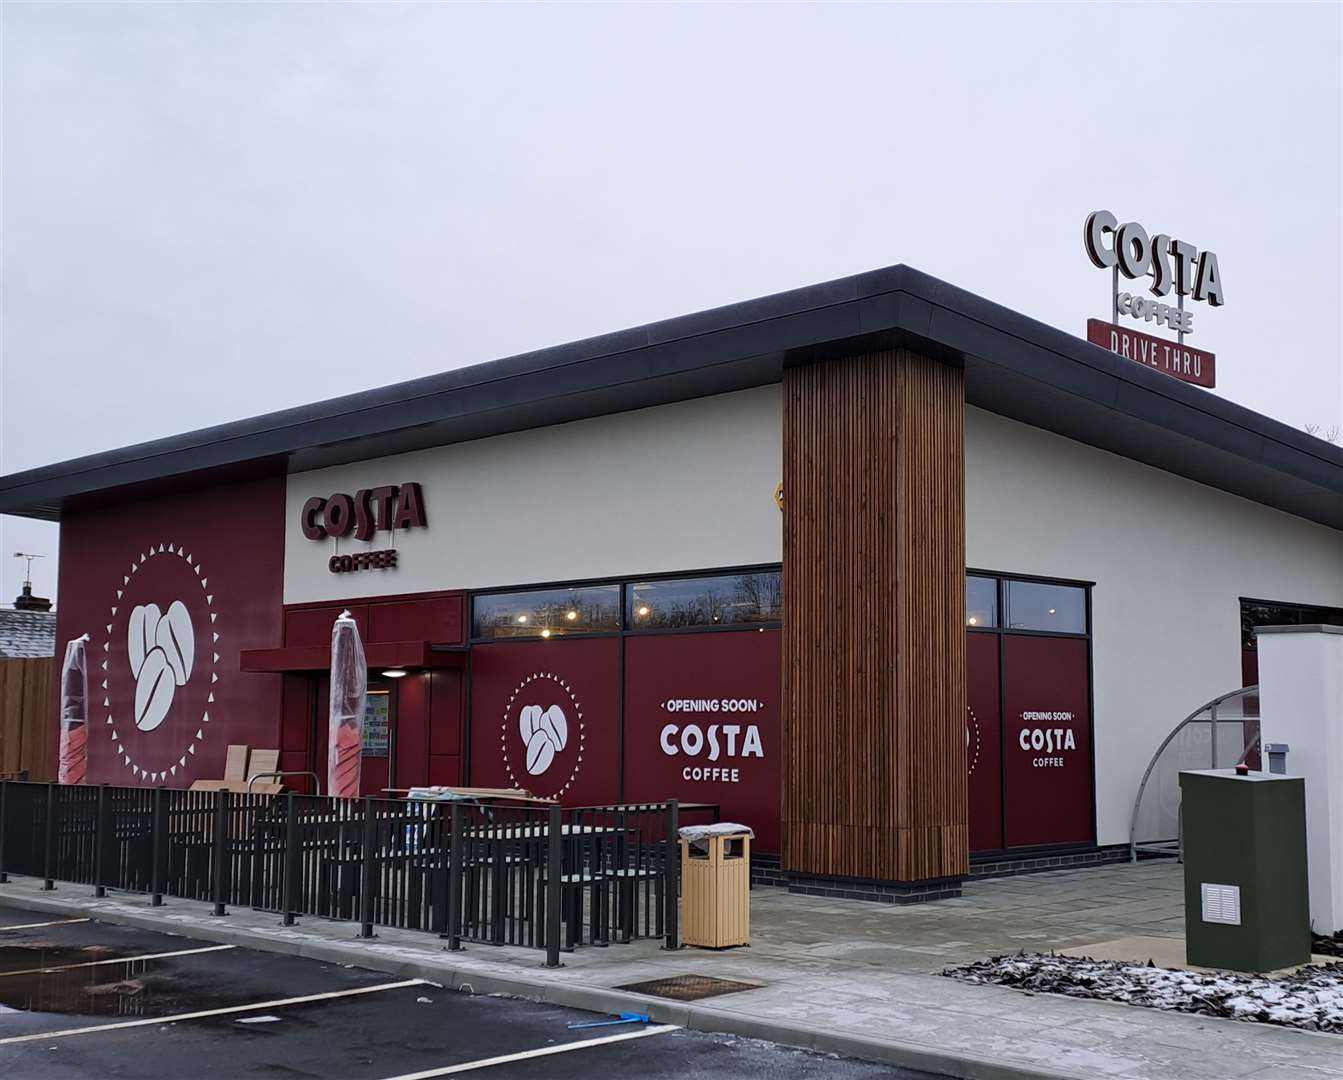 The new Costa Coffee drive-thru is opening in Chestfield, on the outskirts of Whitstable